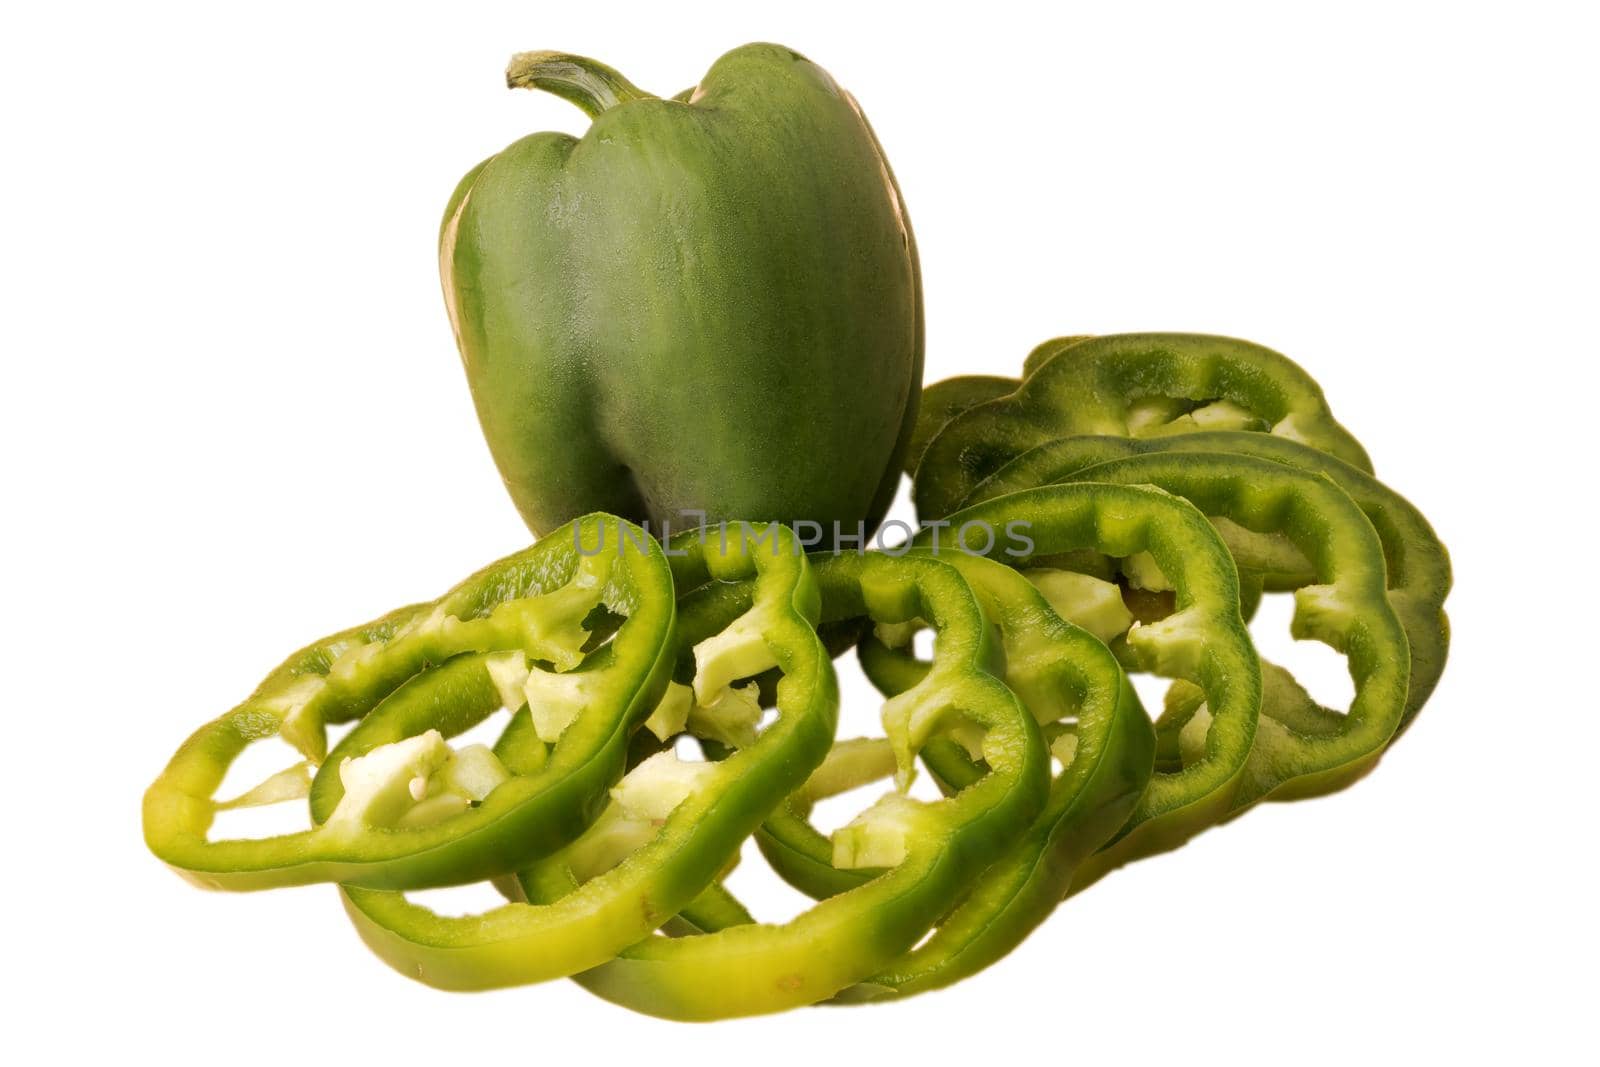 Green bell pepper, whole and sliced, on a white background in isolation by A_A